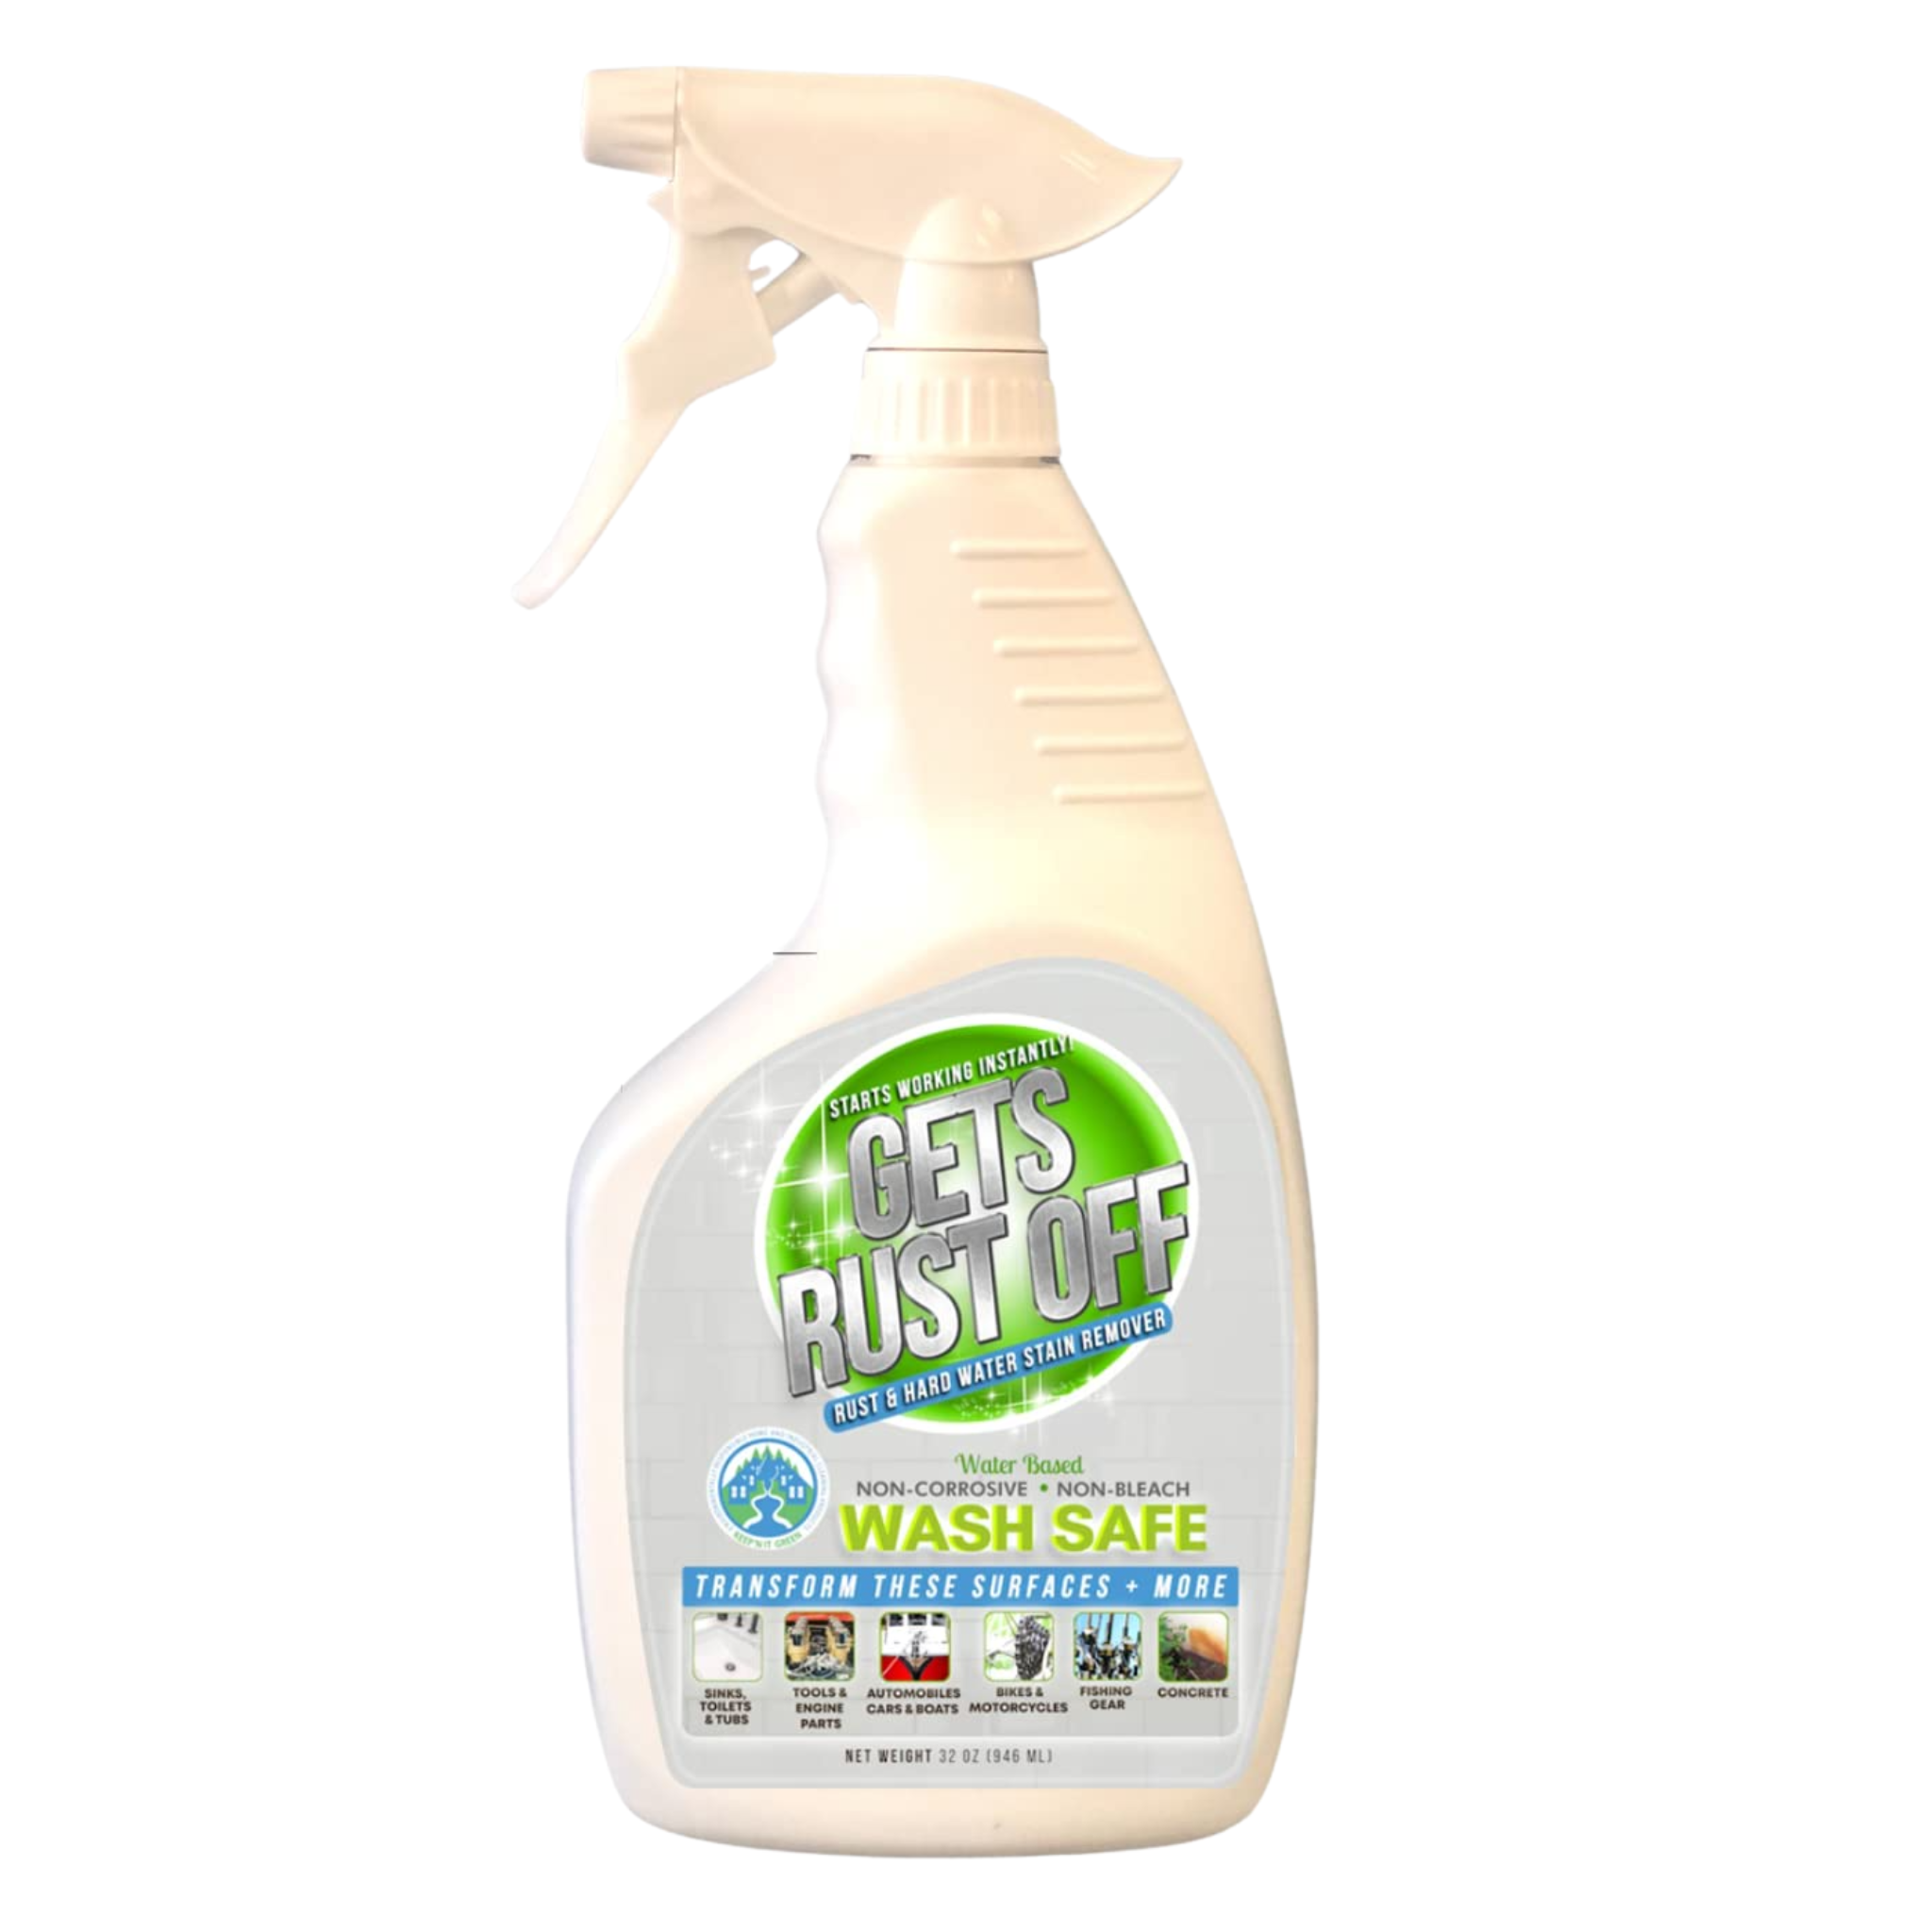 Hard Water Stain Remover 